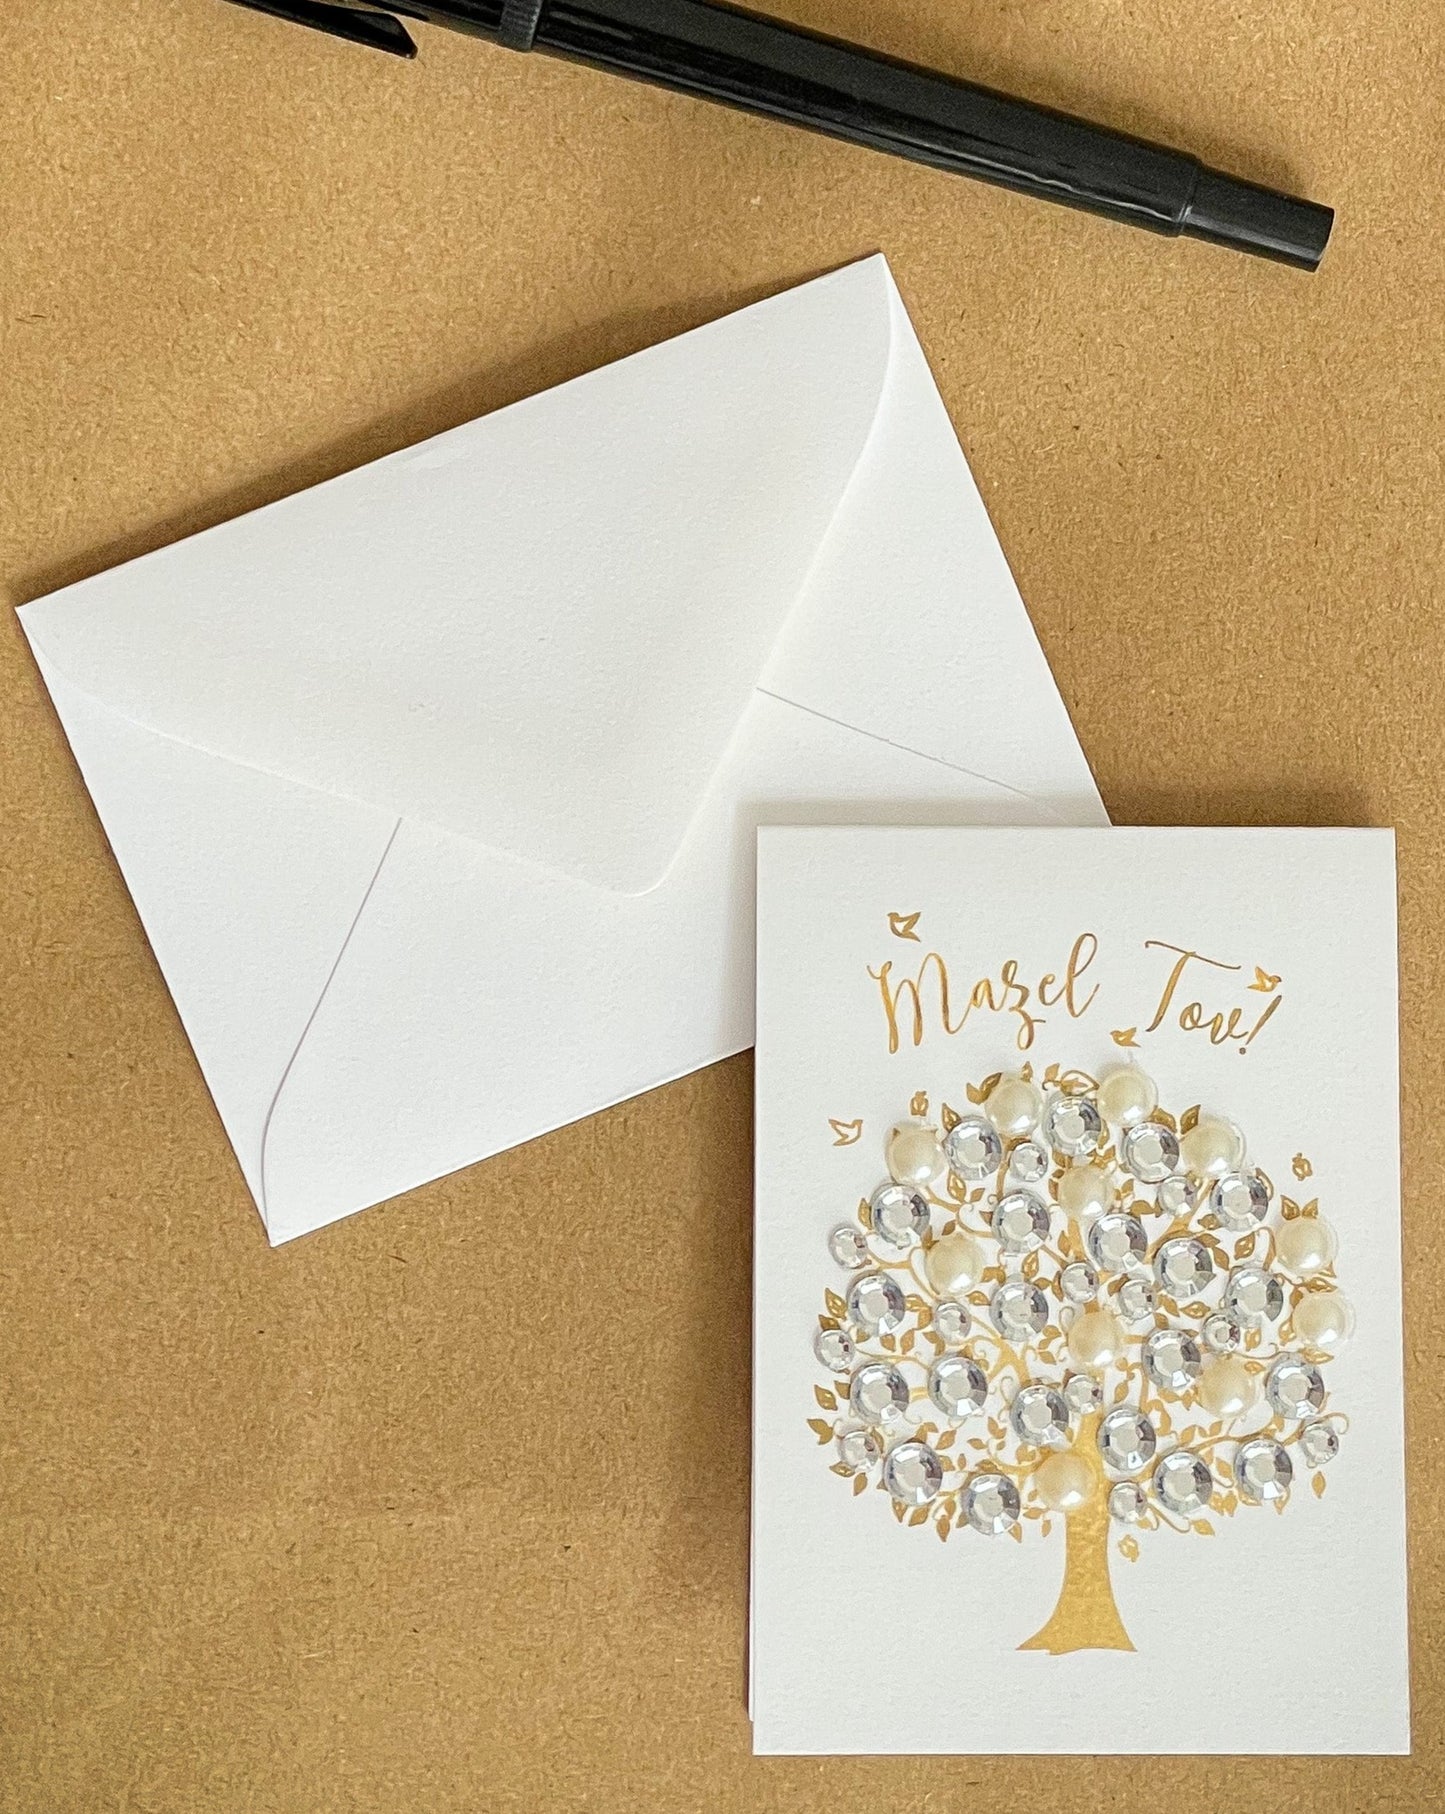 this is a mini note card on a craft paper gift bag with a white envelope and a black marker , the card says Mazel Tov with a decorated tree of life in gold